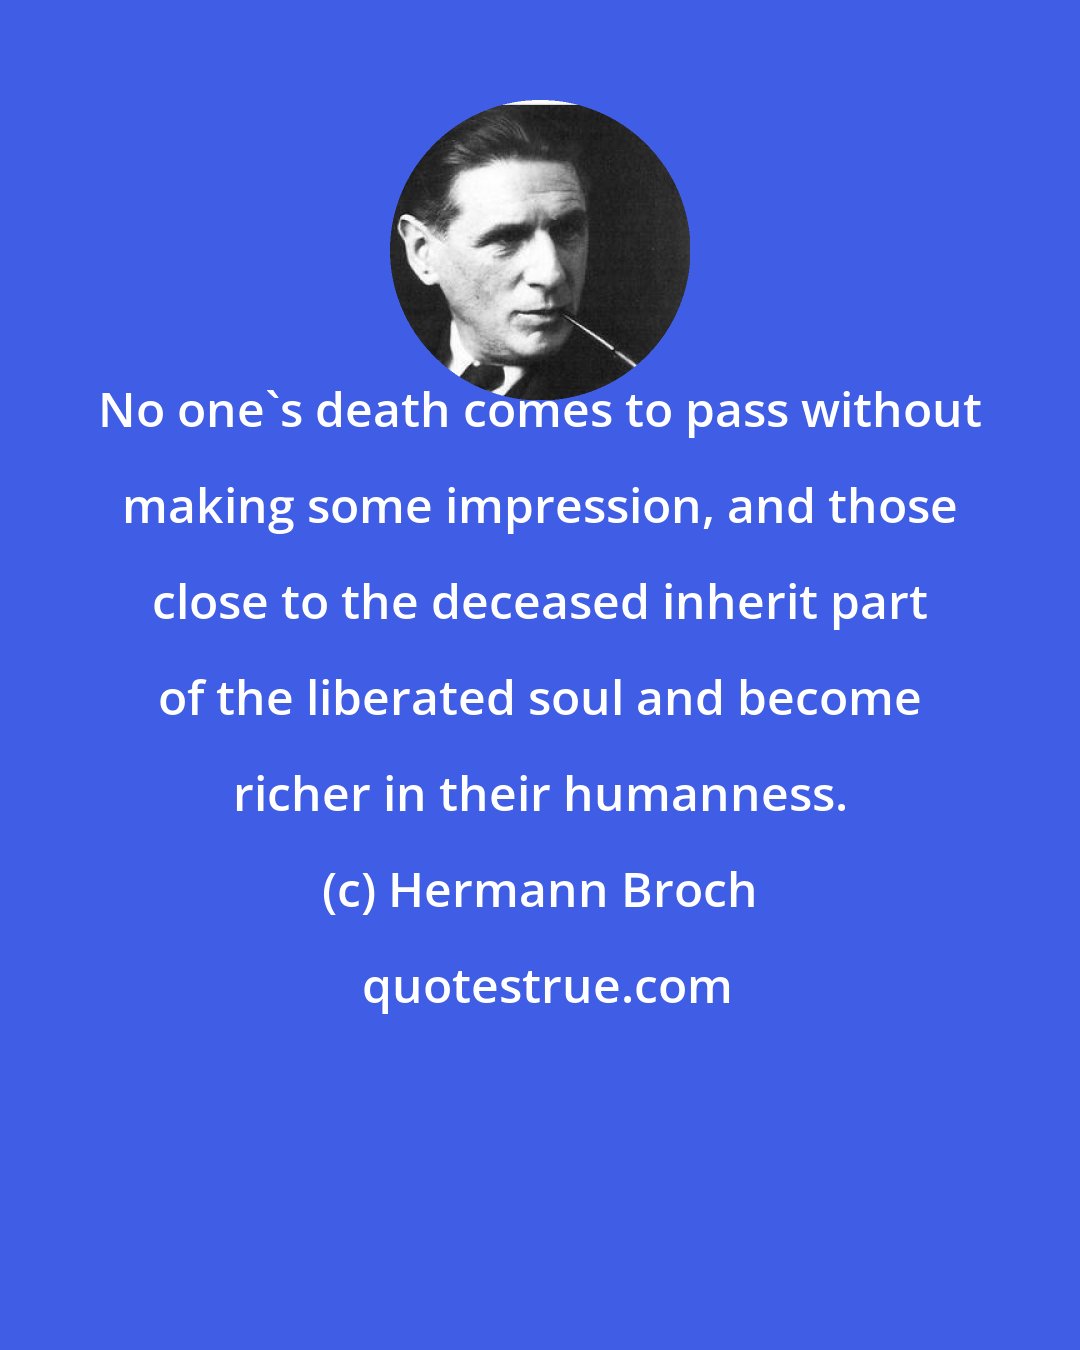 Hermann Broch: No one's death comes to pass without making some impression, and those close to the deceased inherit part of the liberated soul and become richer in their humanness.